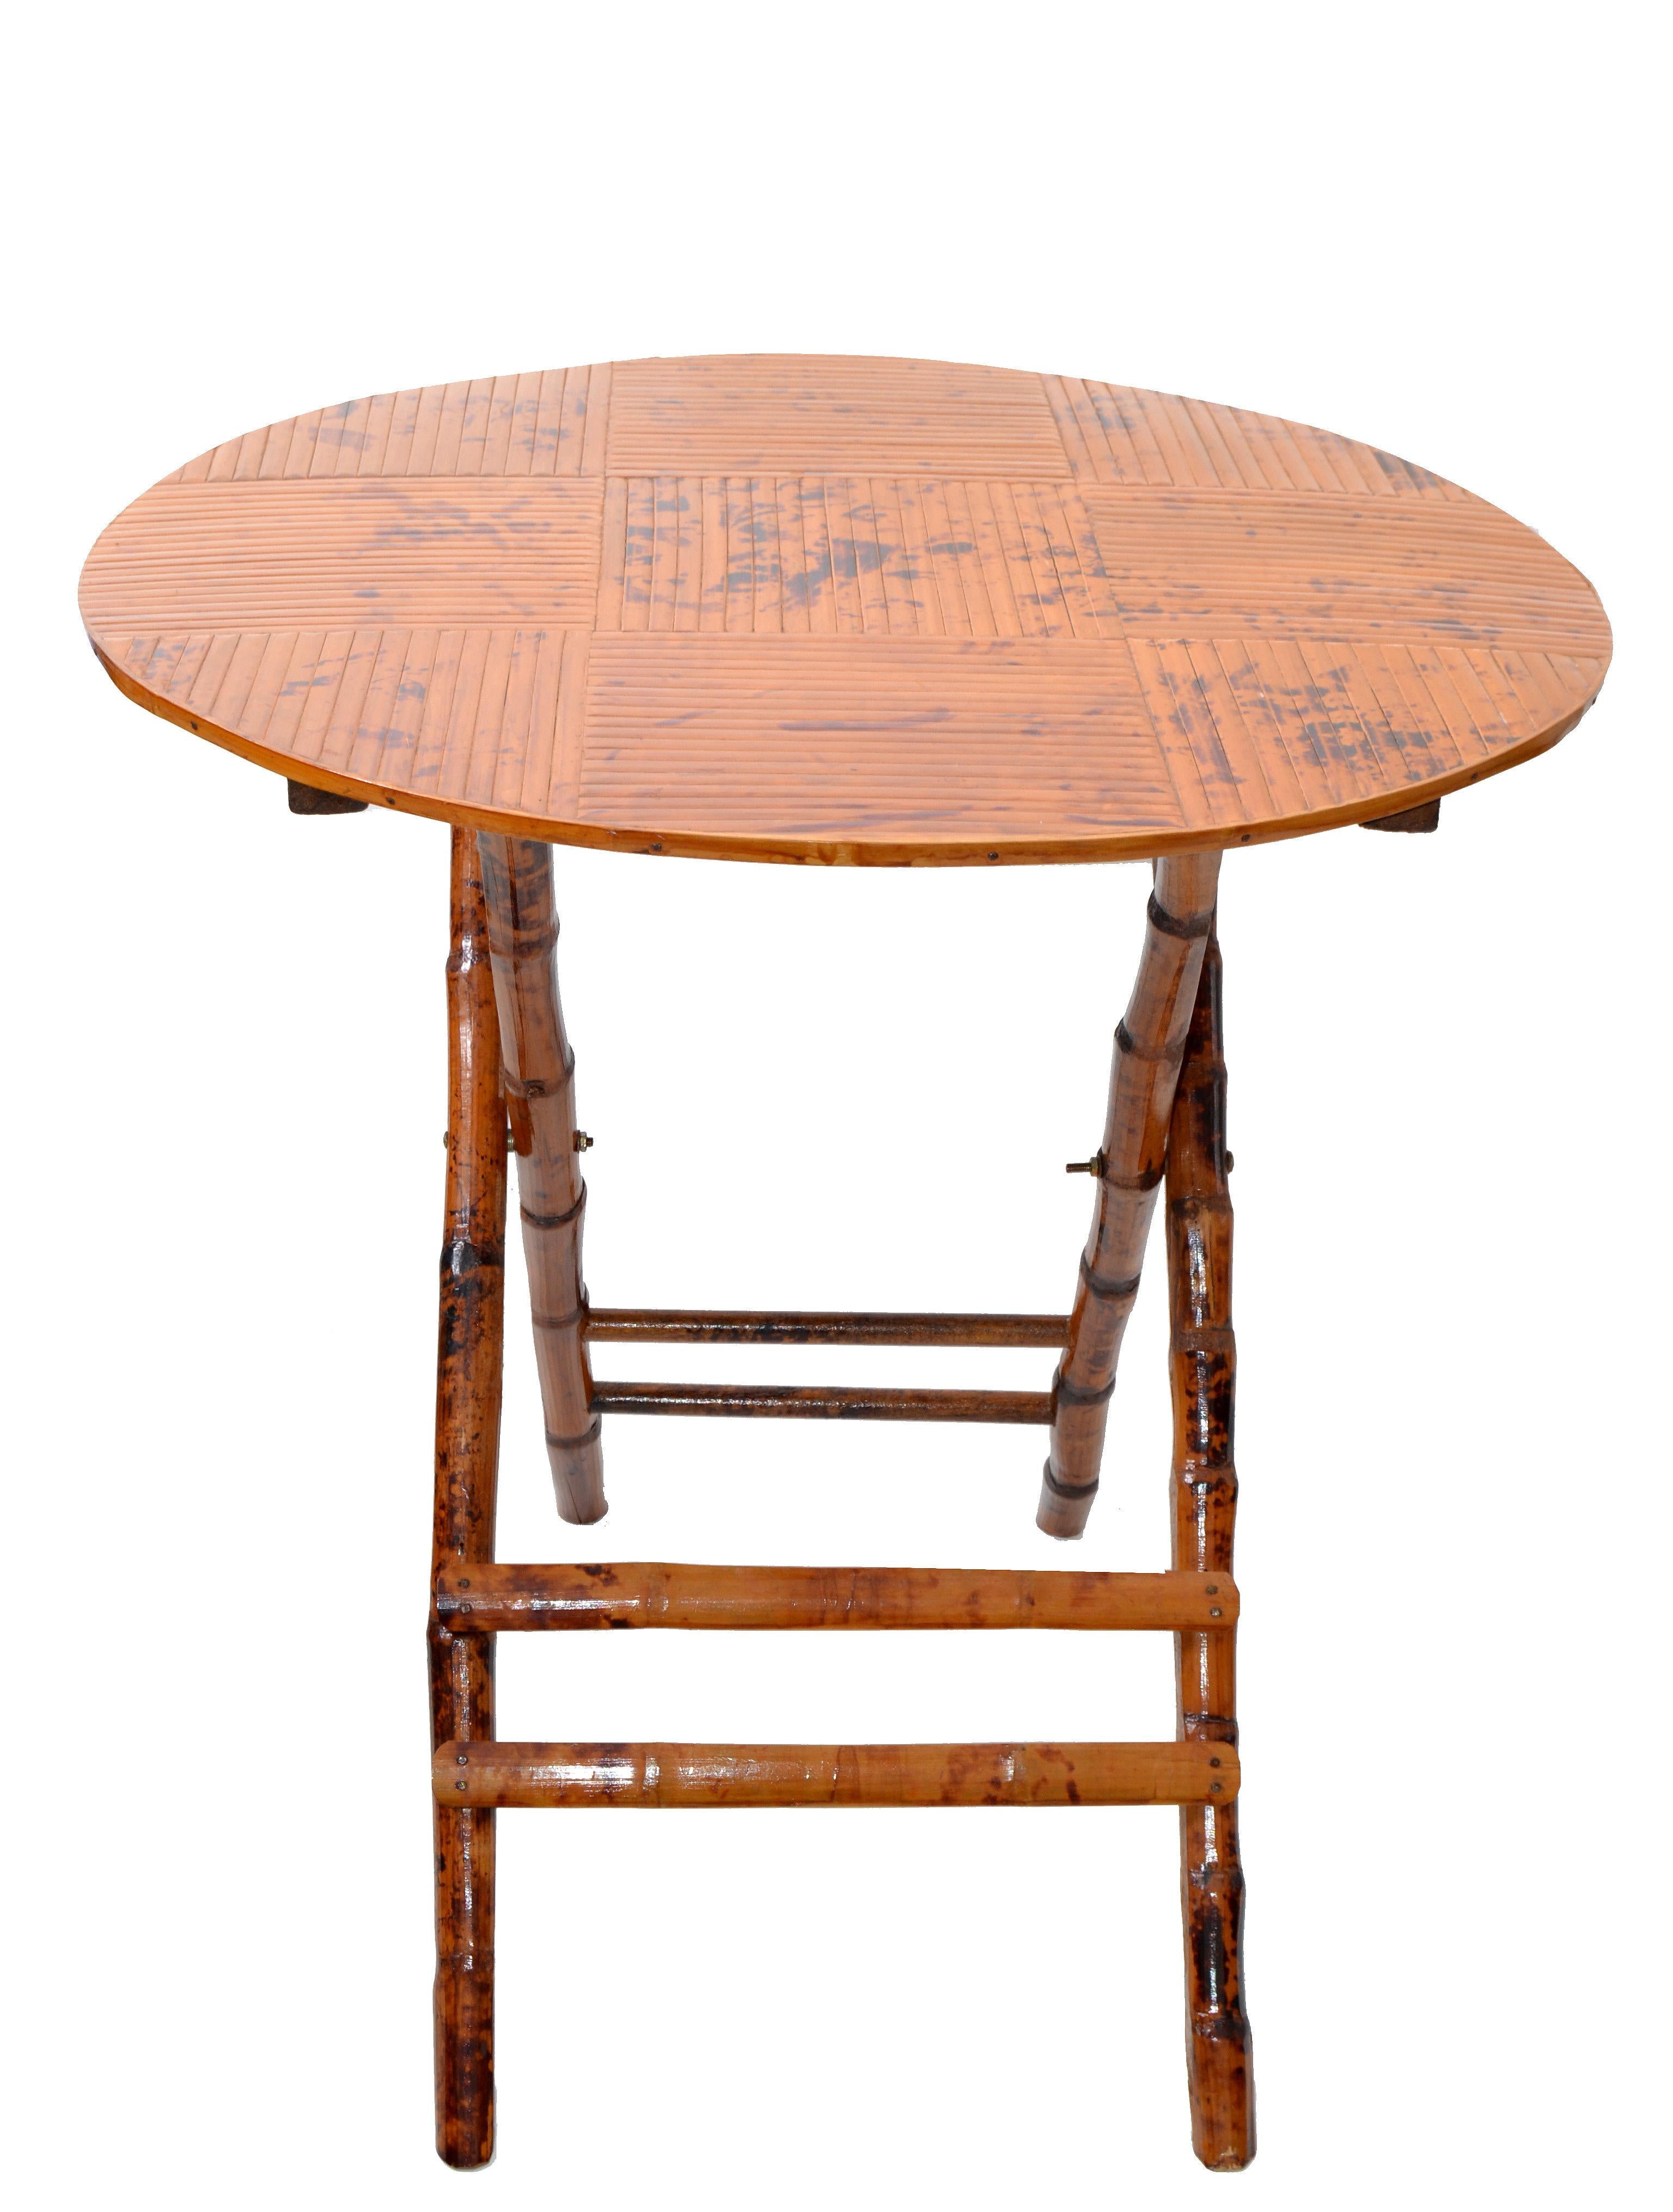 1970s Mid-Century Modern handcrafted round bamboo bistro table.
Decorative and sturdy X-base.
The table is easy to fold and uses a small storage place.